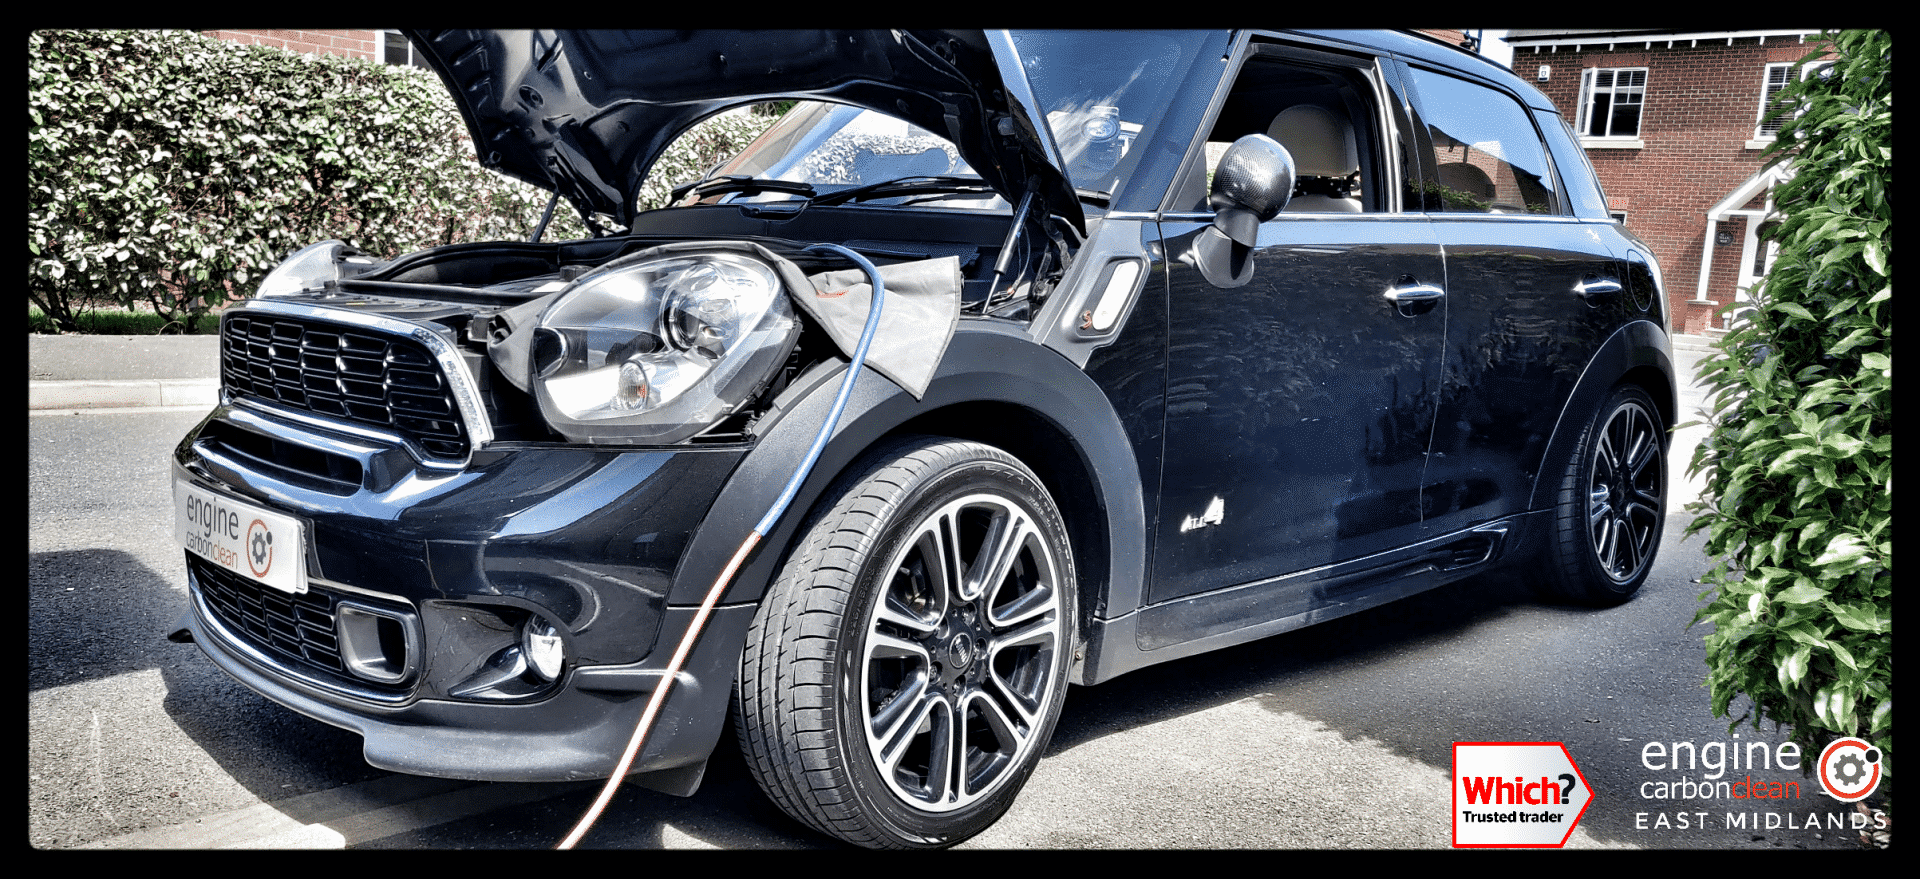 Diagnostic Consultation and Engine Carbon Clean on a Mini Cooper SD (2014 - 73,760 miles)